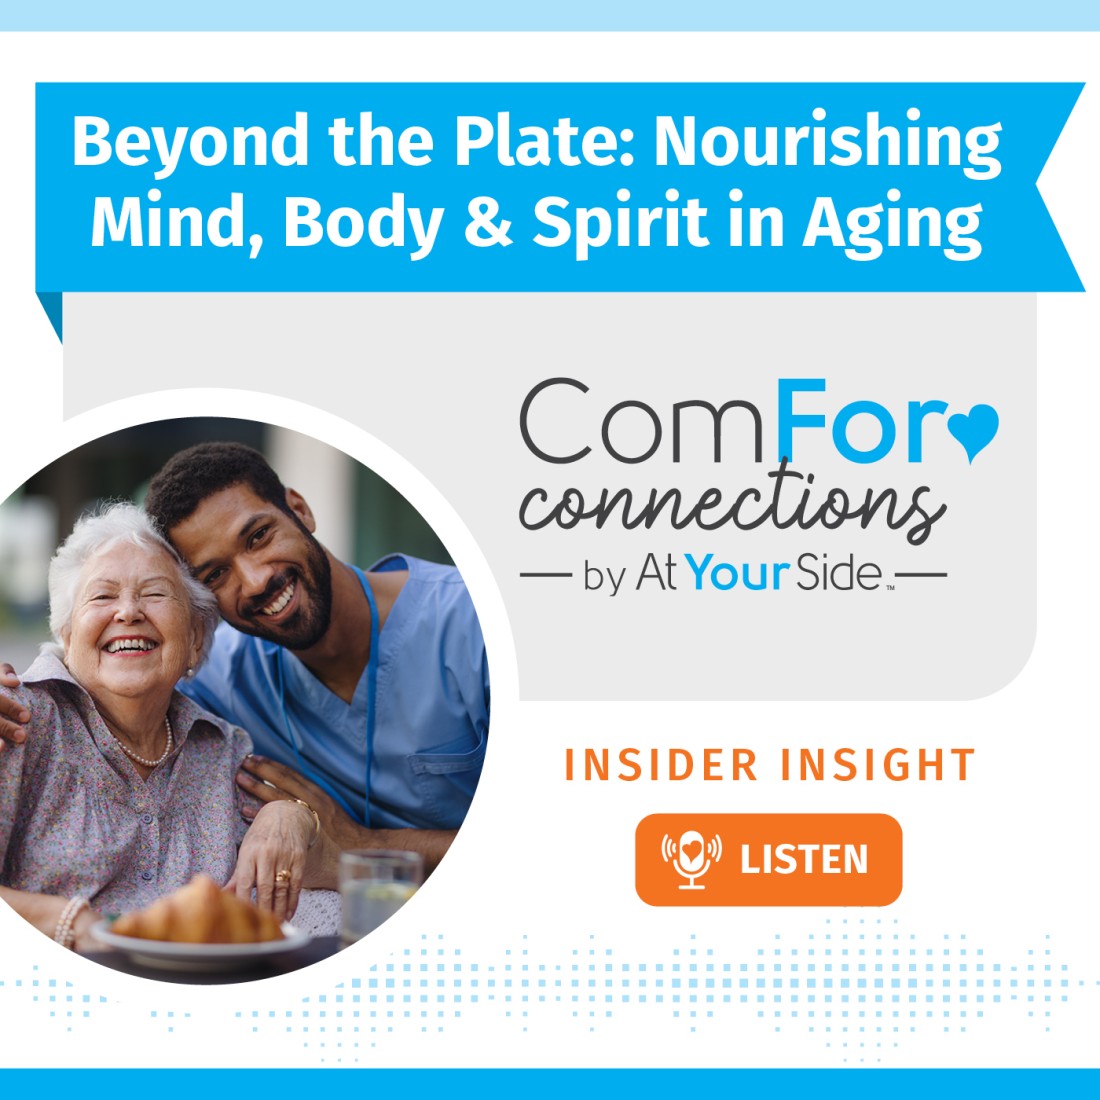 Podcast Resources: Expanding Your Home Care Knowledge - Social_Media_Graphic__Beyond_the_Plate_Nourishing_Mind%2C_Body_%26_Spirit_in_Aging_(1)